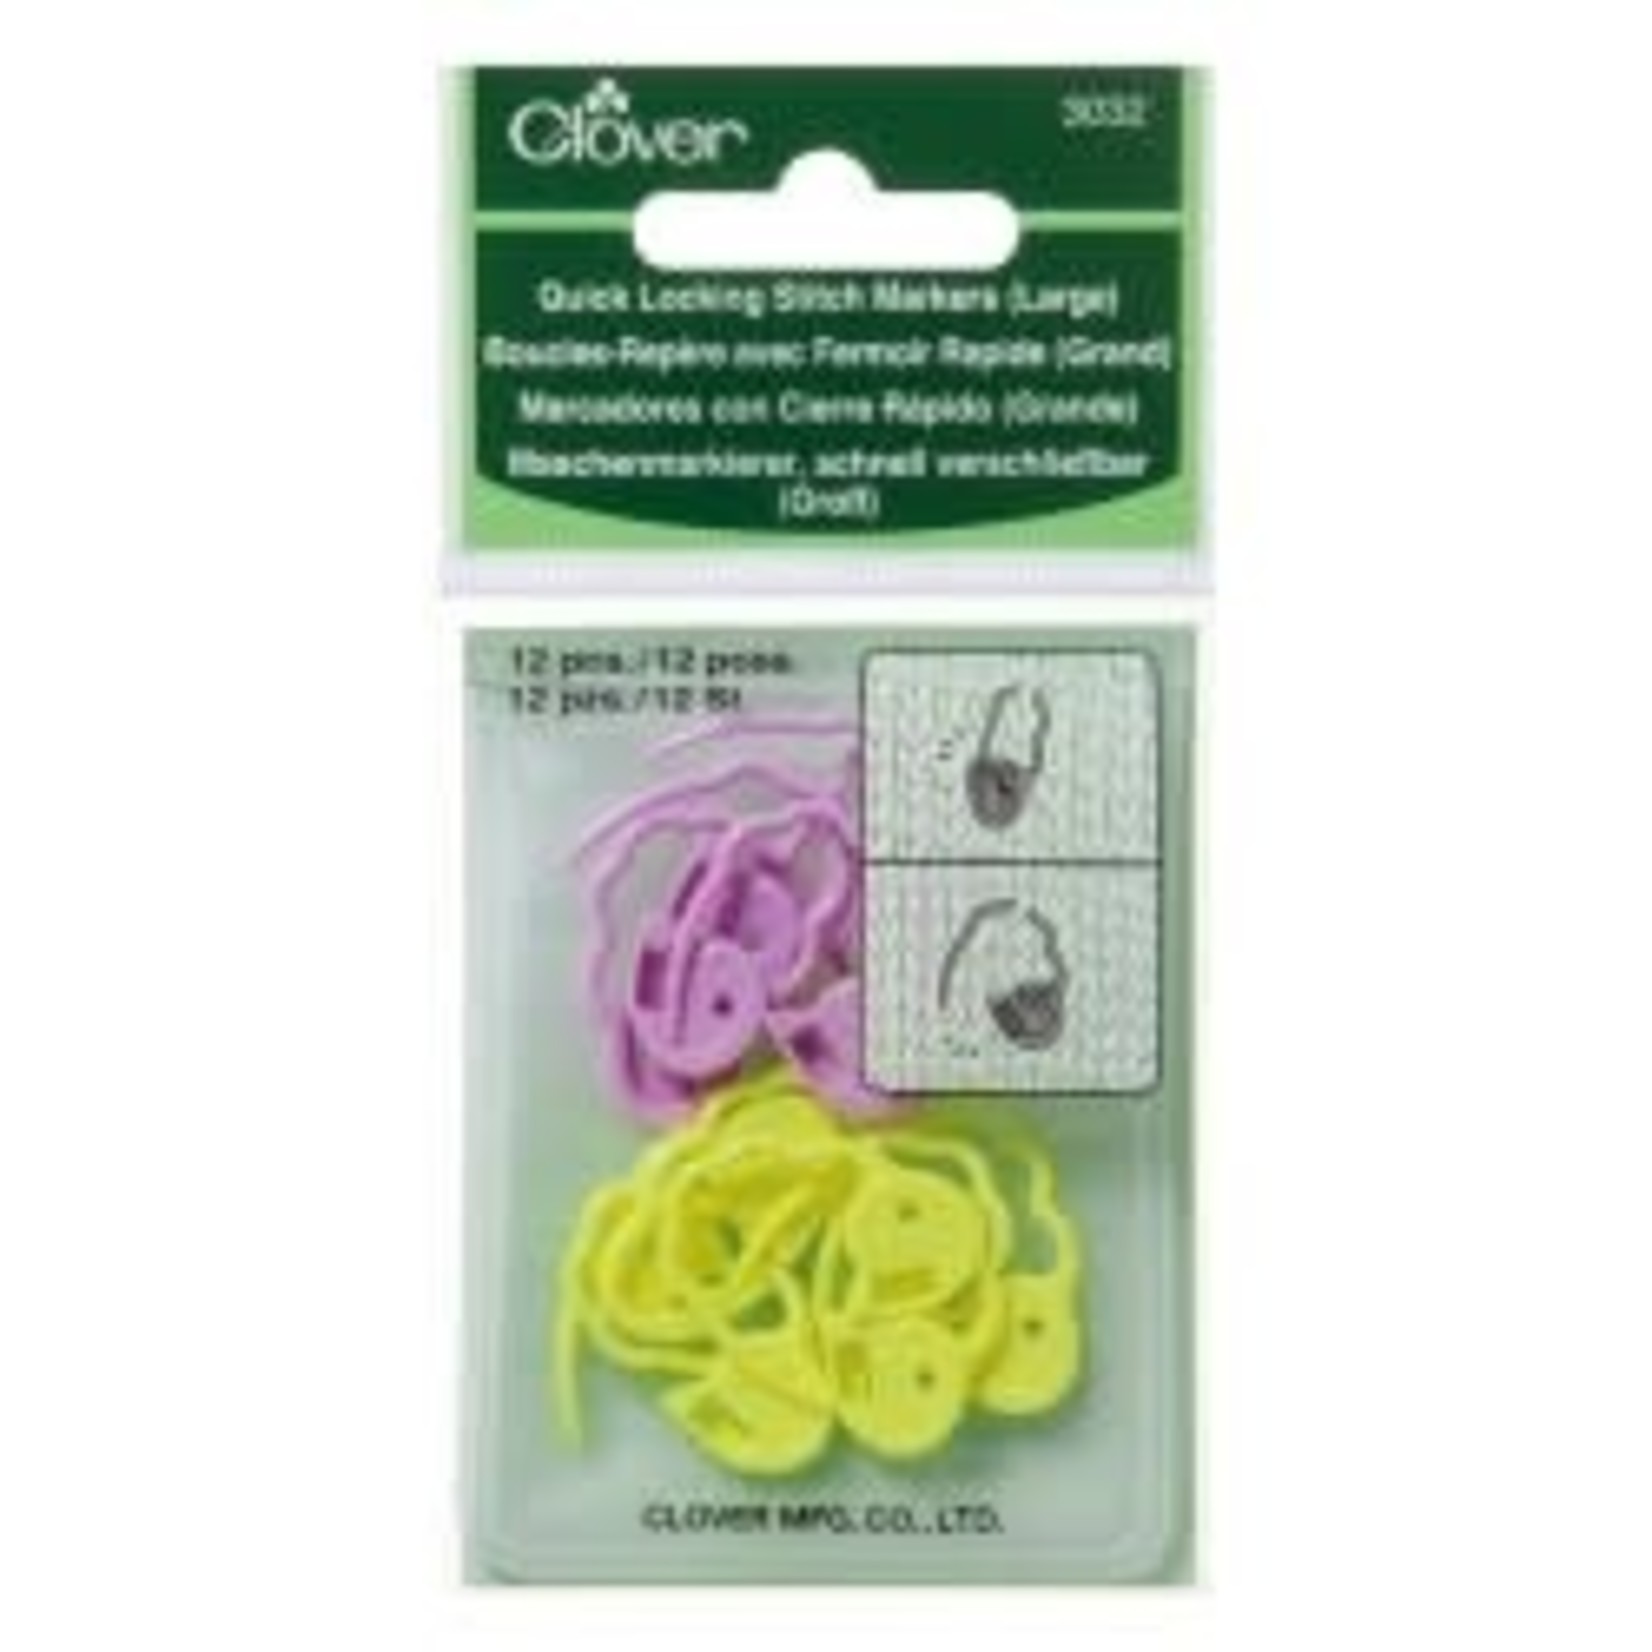 Clover Clover Quick Locking Stitch Markers (Large)